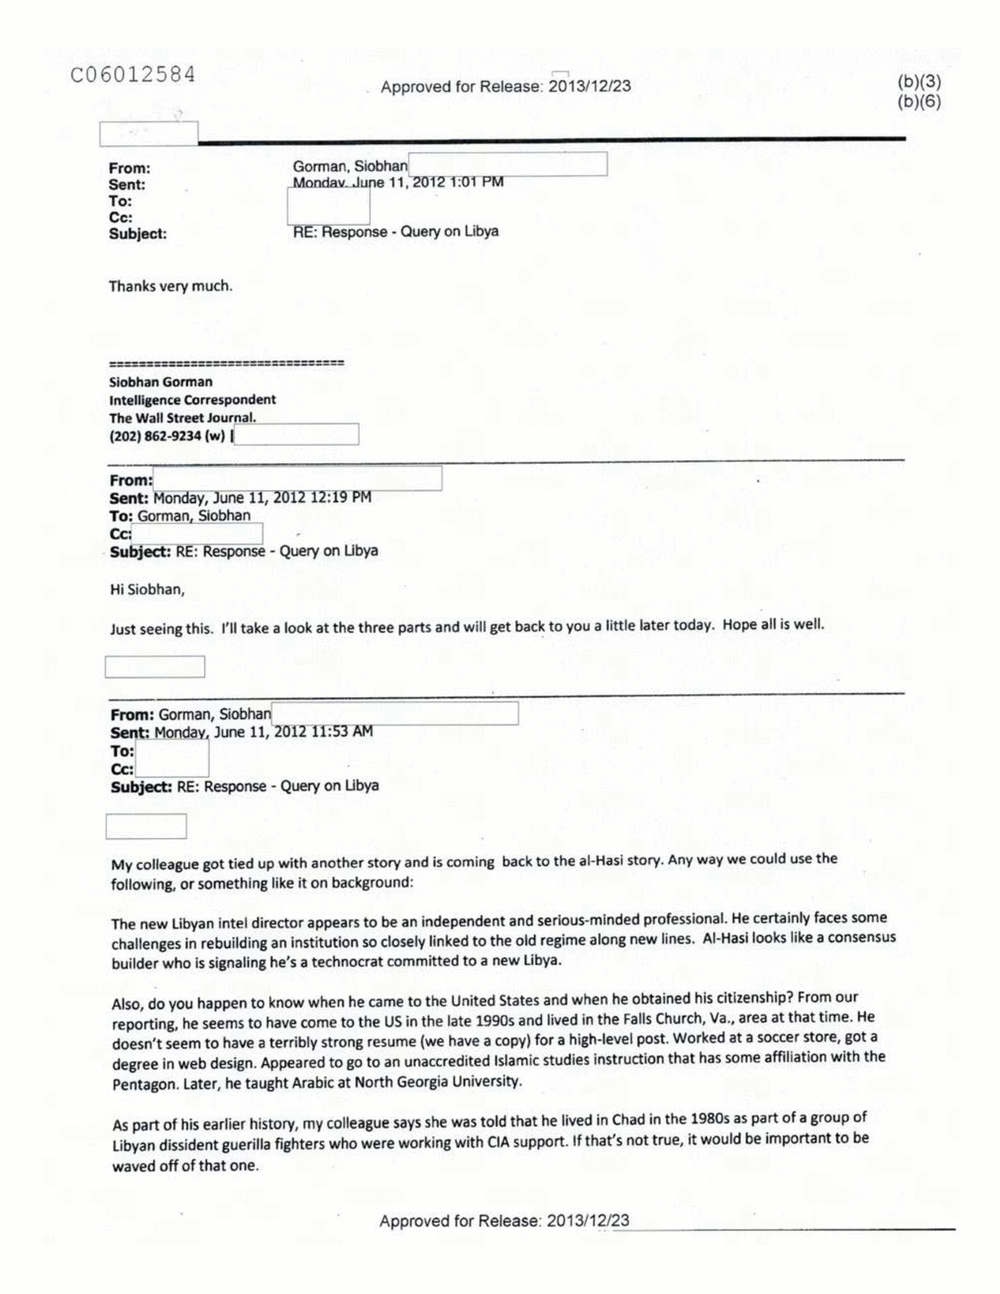 Page 127 from Email Correspondence Between Reporters and CIA Flacks